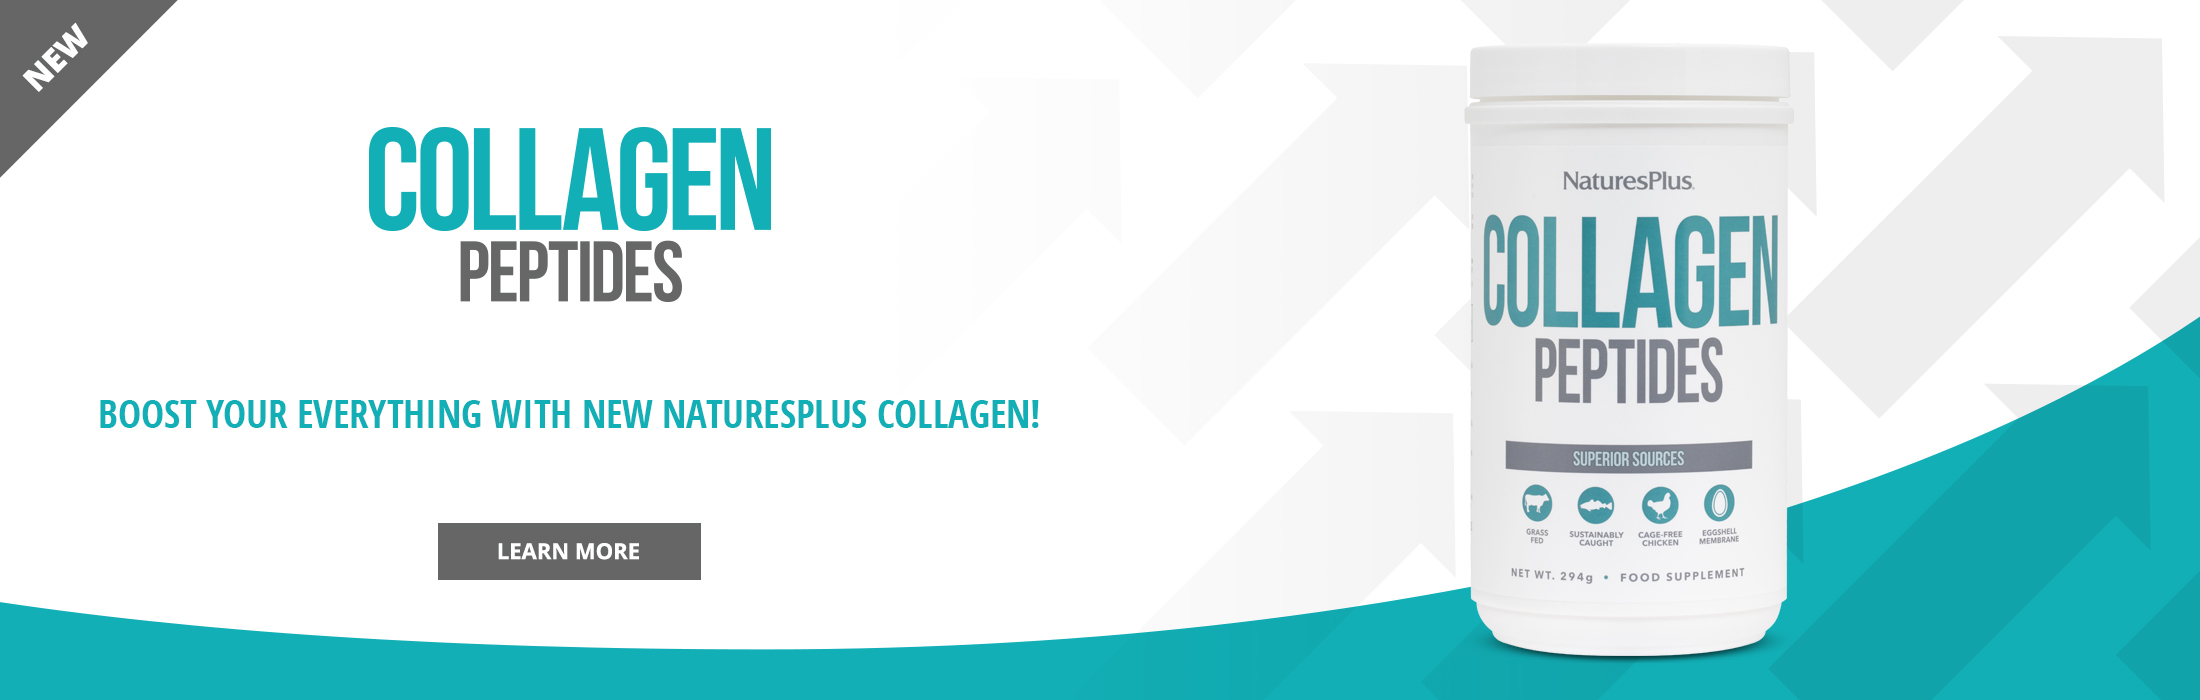 COL-Launch_HP_Banner-UE